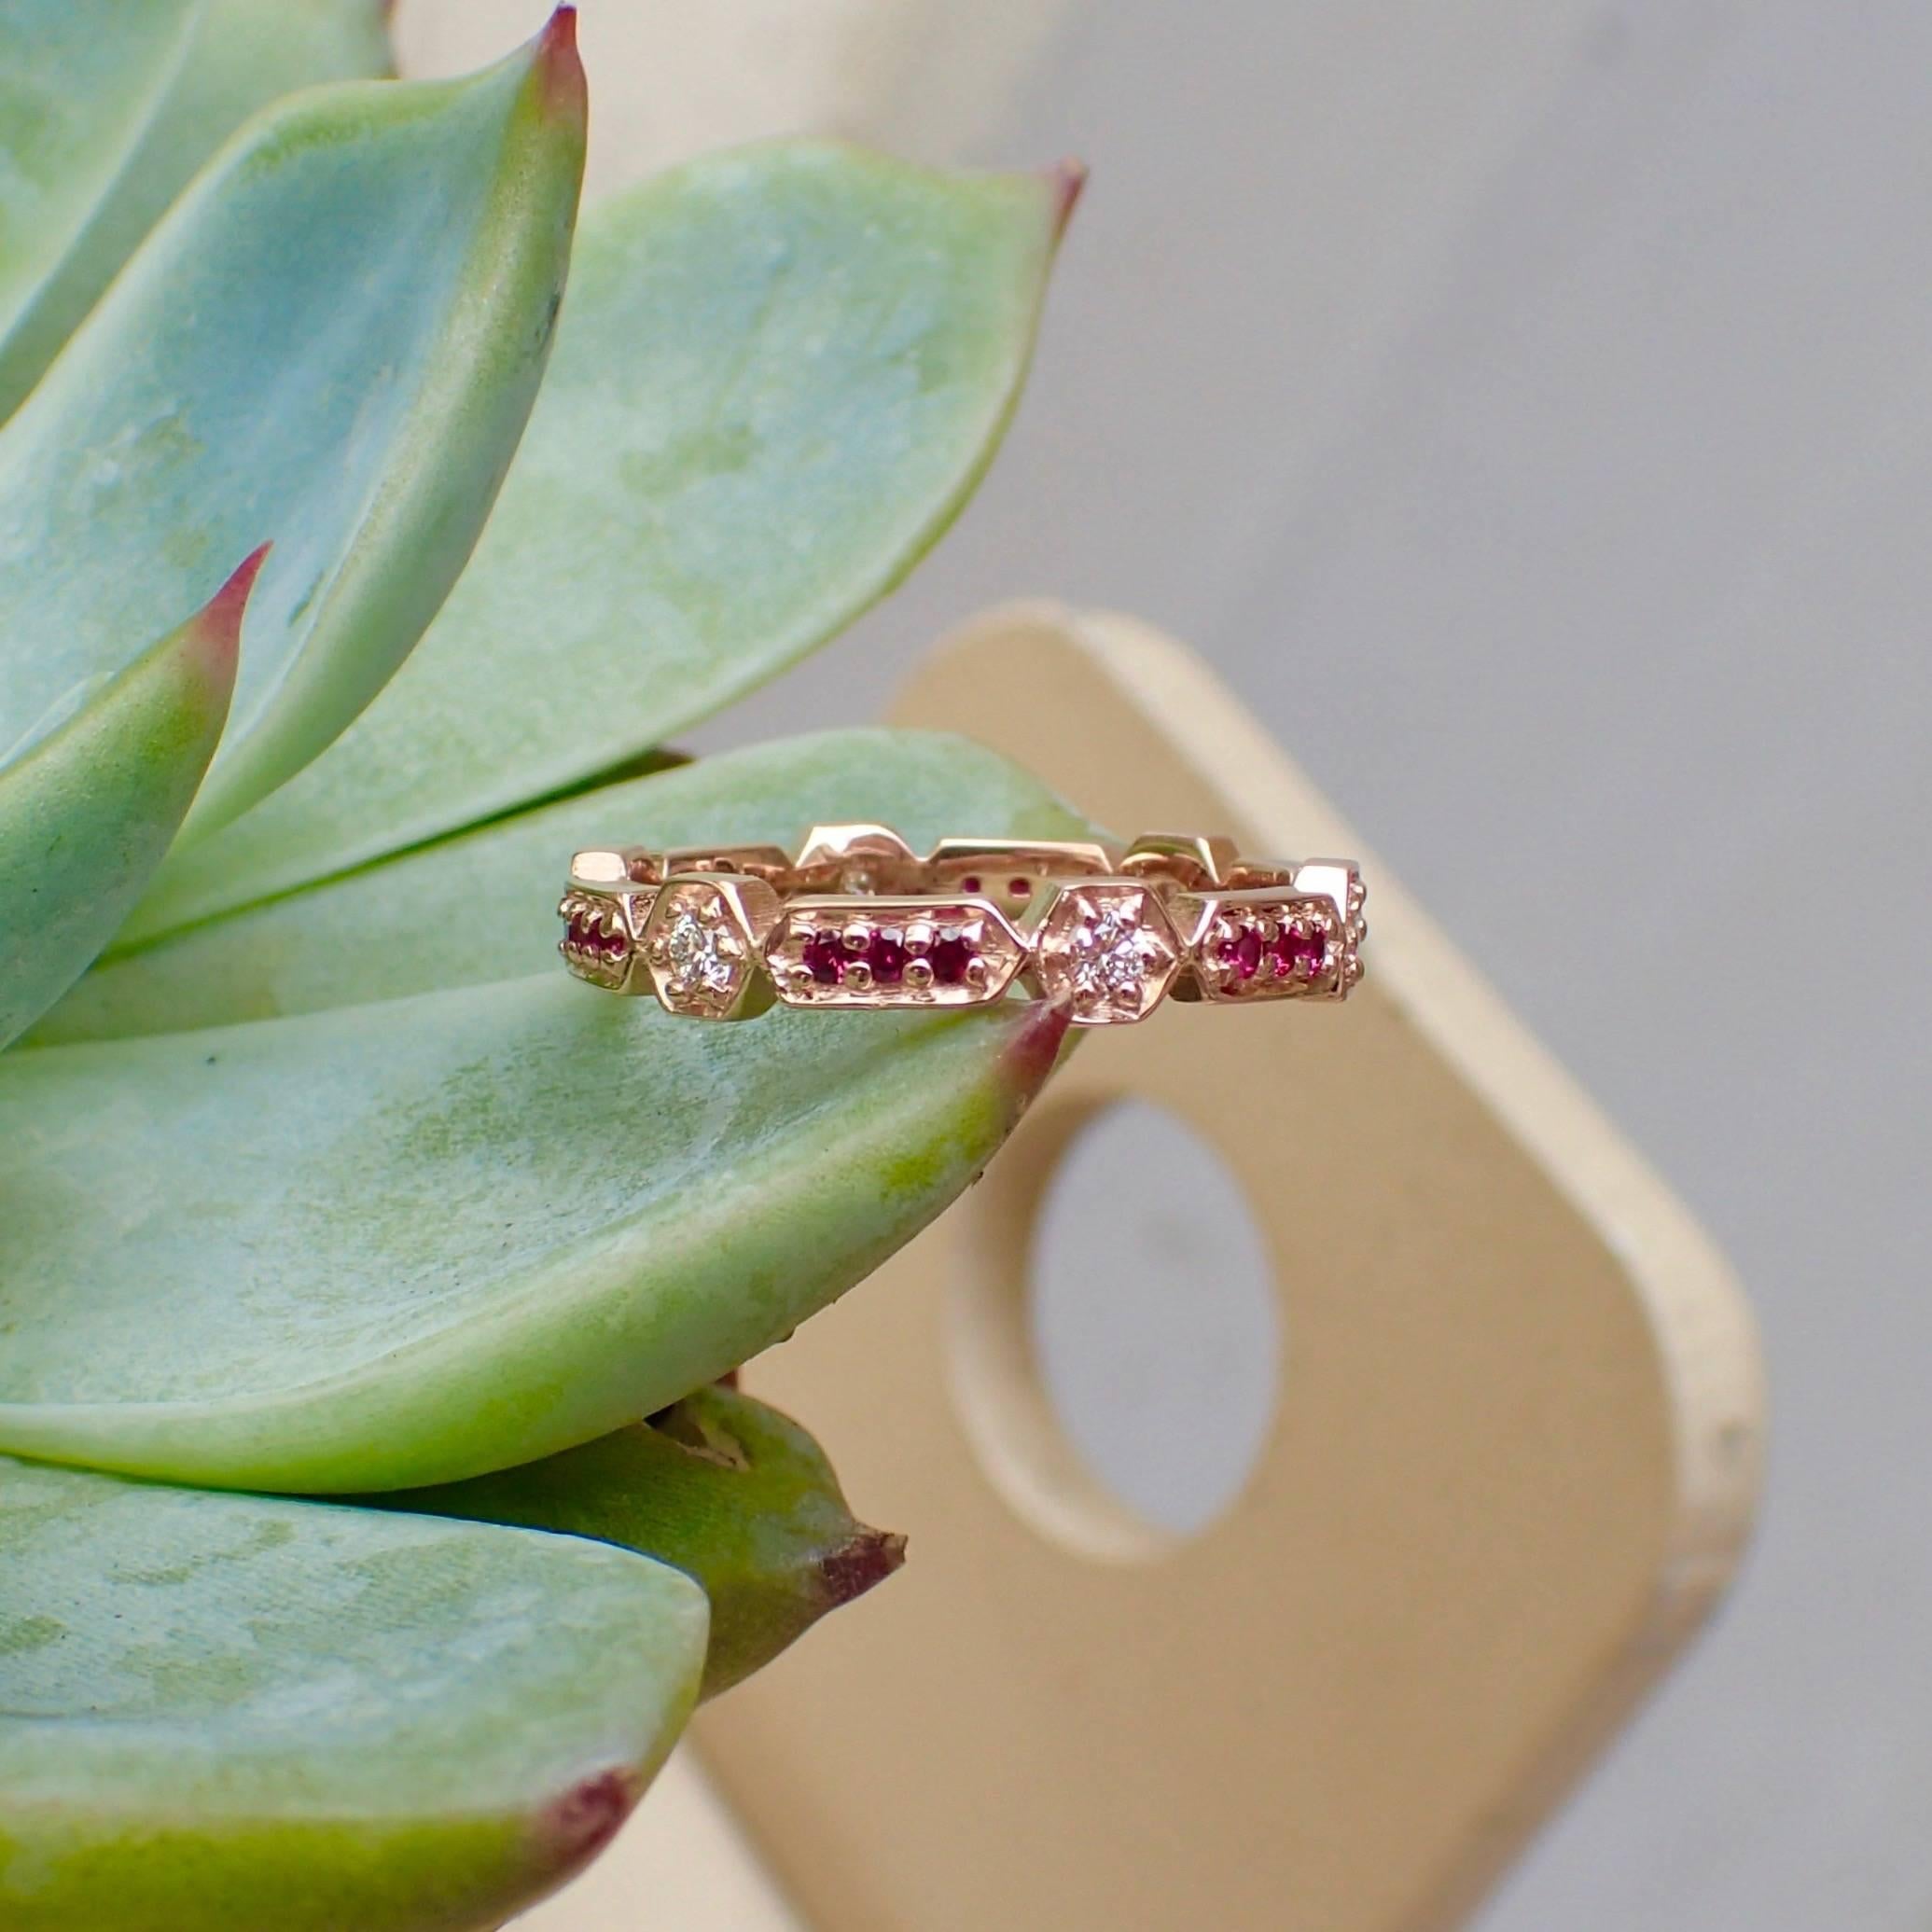 18k Rose Gold Eternity Band with six (6) Round Brilliant Cut Diamonds that measure 2mm and weigh a total of 0.19 carats with Clarity Grade VS and Color Grade G and eighteen (18) Fine Rubies that measure 1.3mm and weigh a total of 0.20 carats and